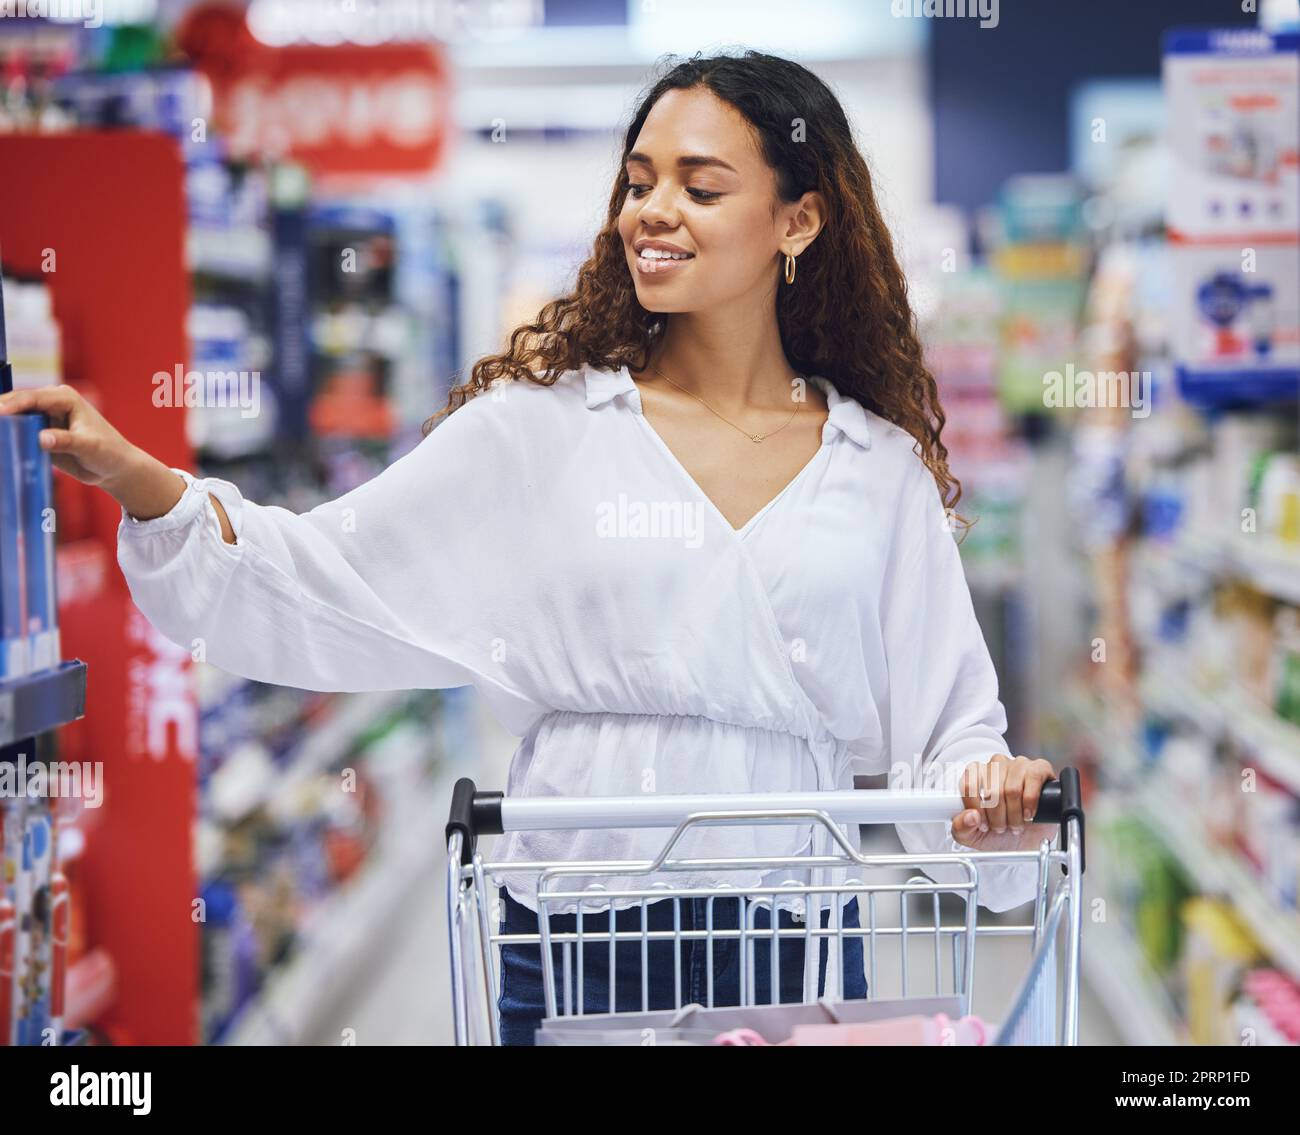 Customer, shopper and consumer shopping for groceries in a supermarket store, mall shop or retail outlet. Happy woman pushing trolley in aisle to buy sale products, discount goods and brand offers Stock Photo